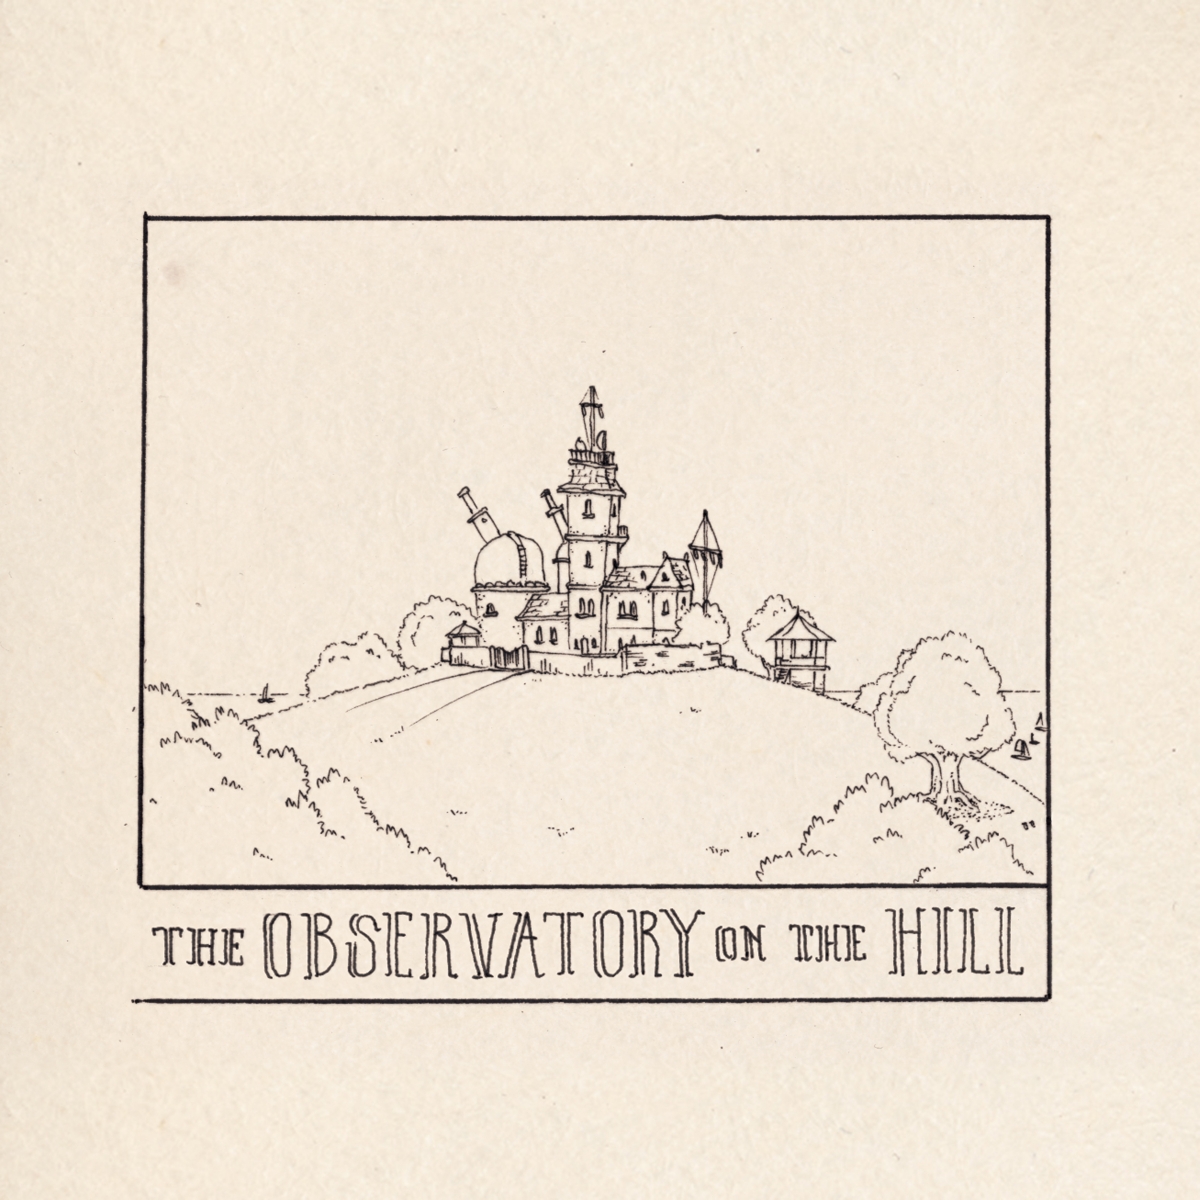 A detail showing Observatory Hill.